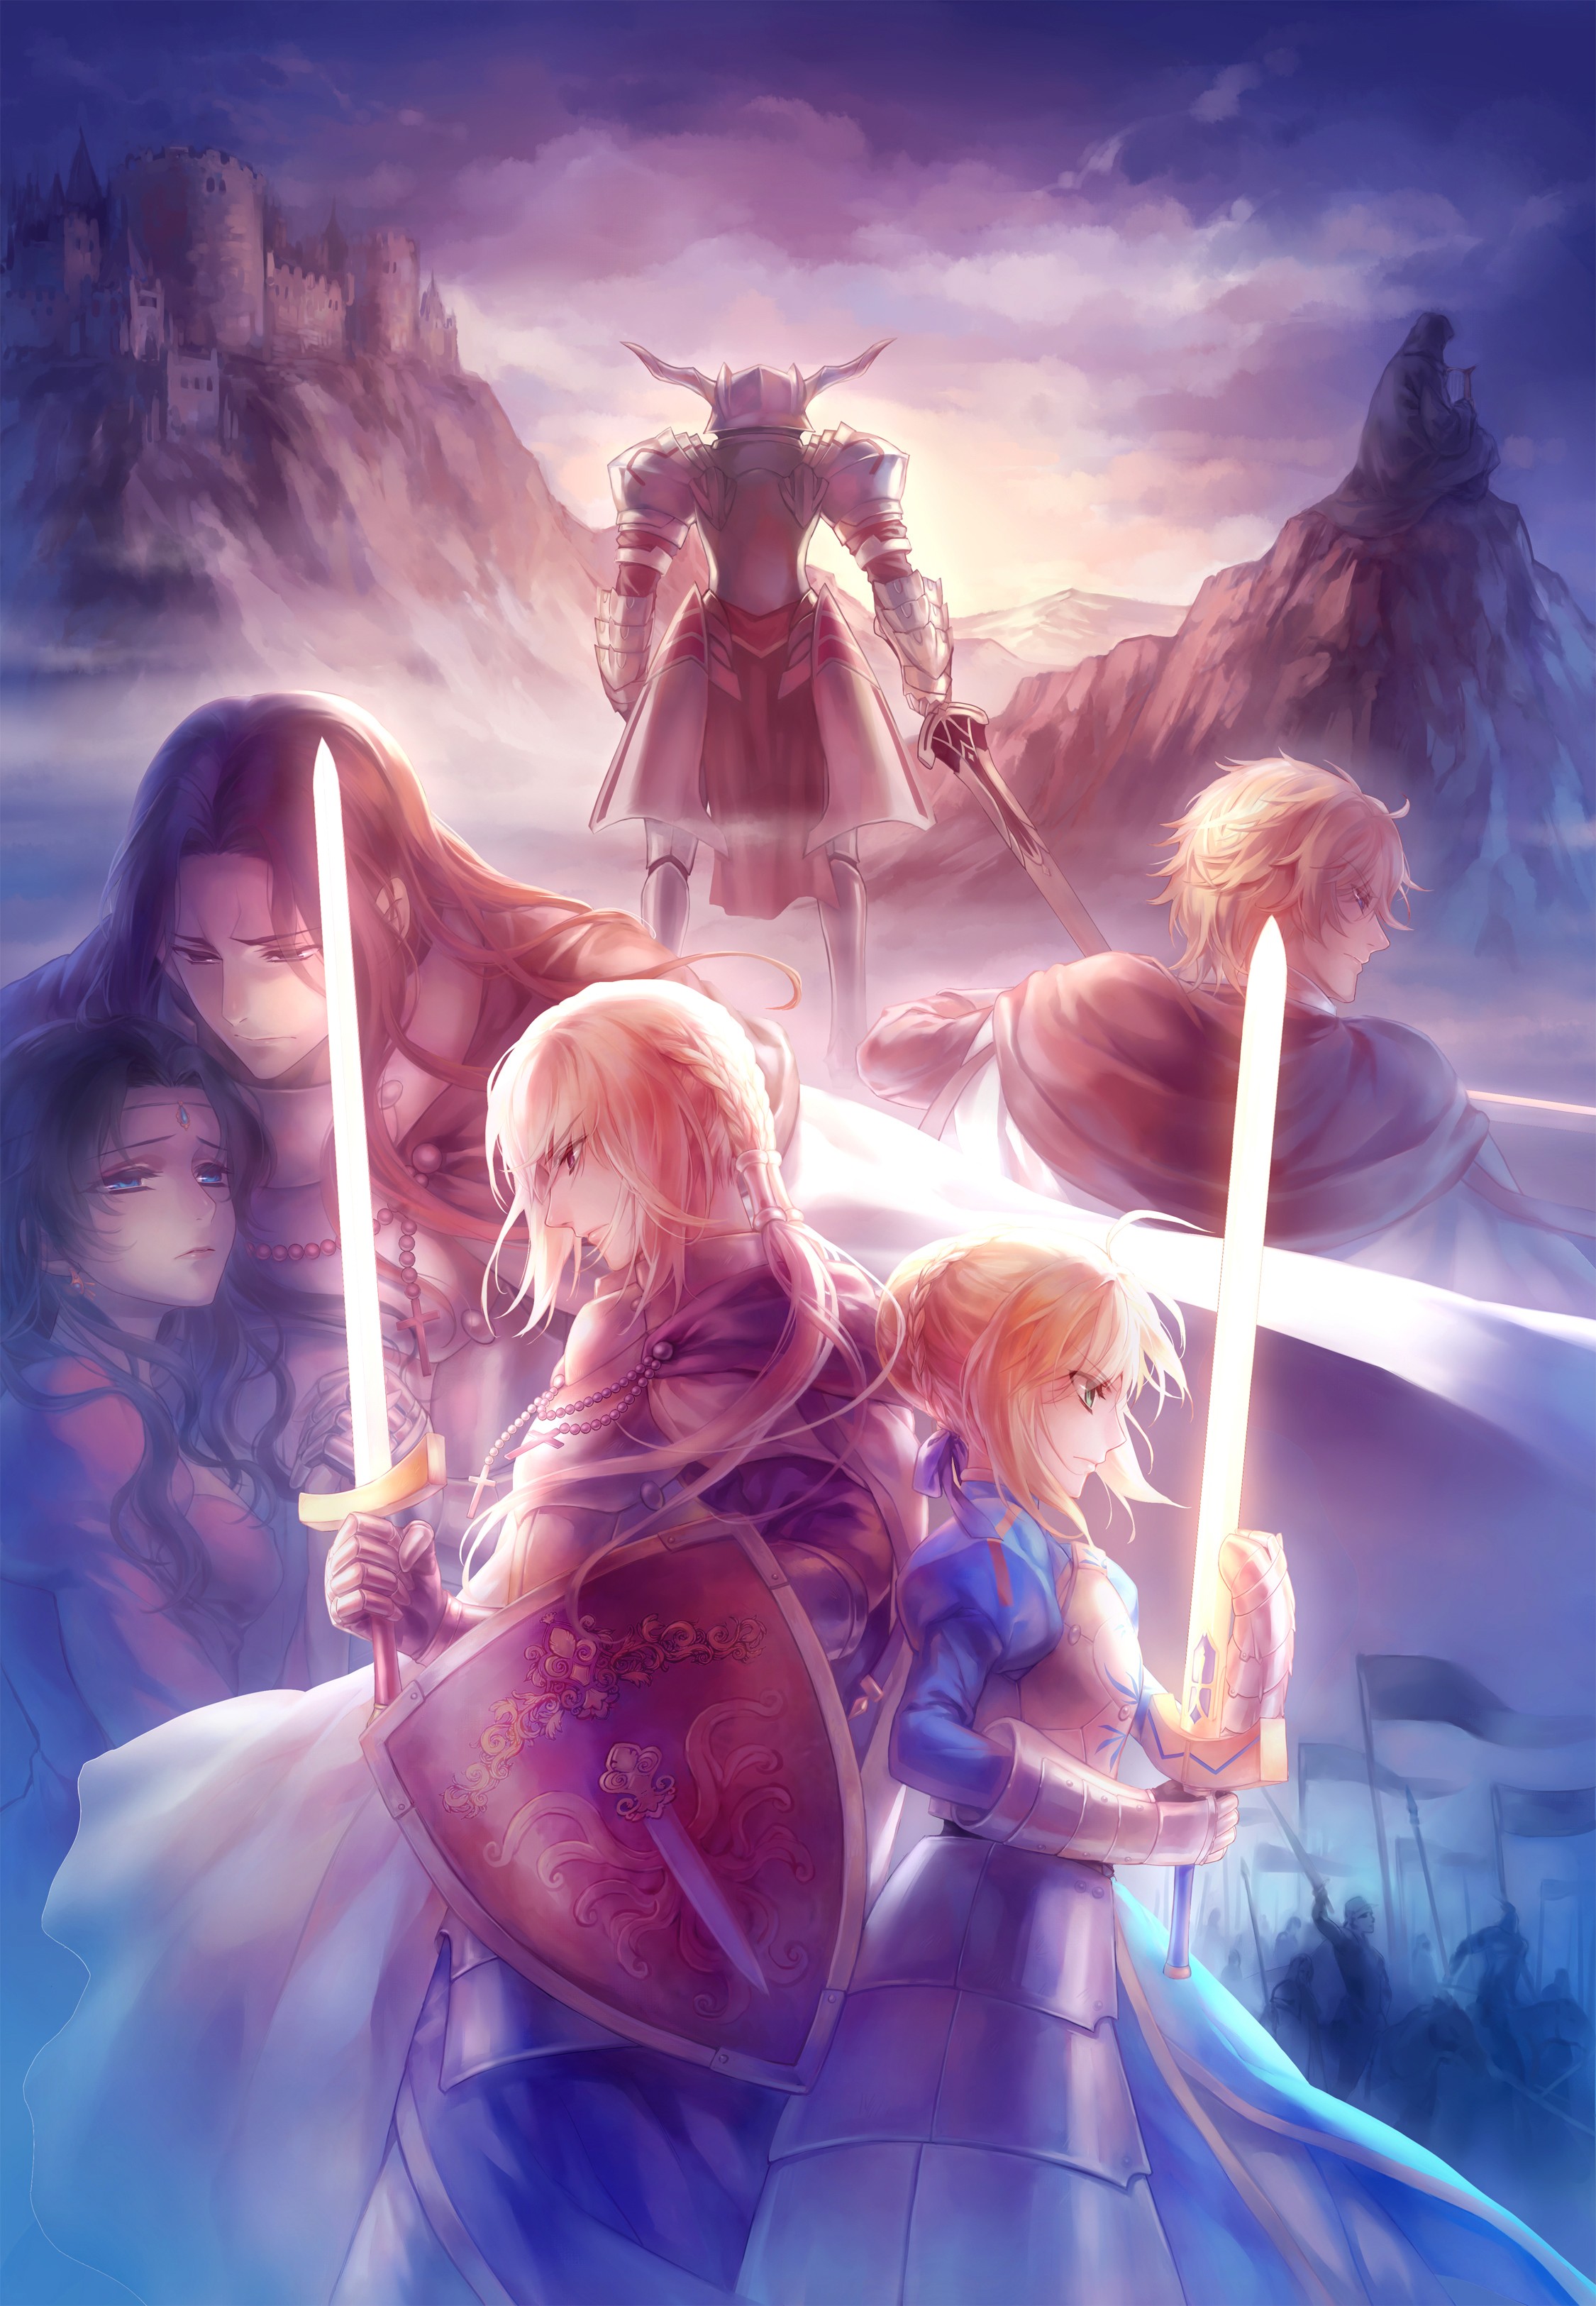 Anime 2250x3250 fantasy art anime girls sword shield Fate series Saber Mordred (Fate/Apocrypha) Gawain (Fate/Grand Order) Lancelot (Fate/Grand Order) anime women with swords weapon